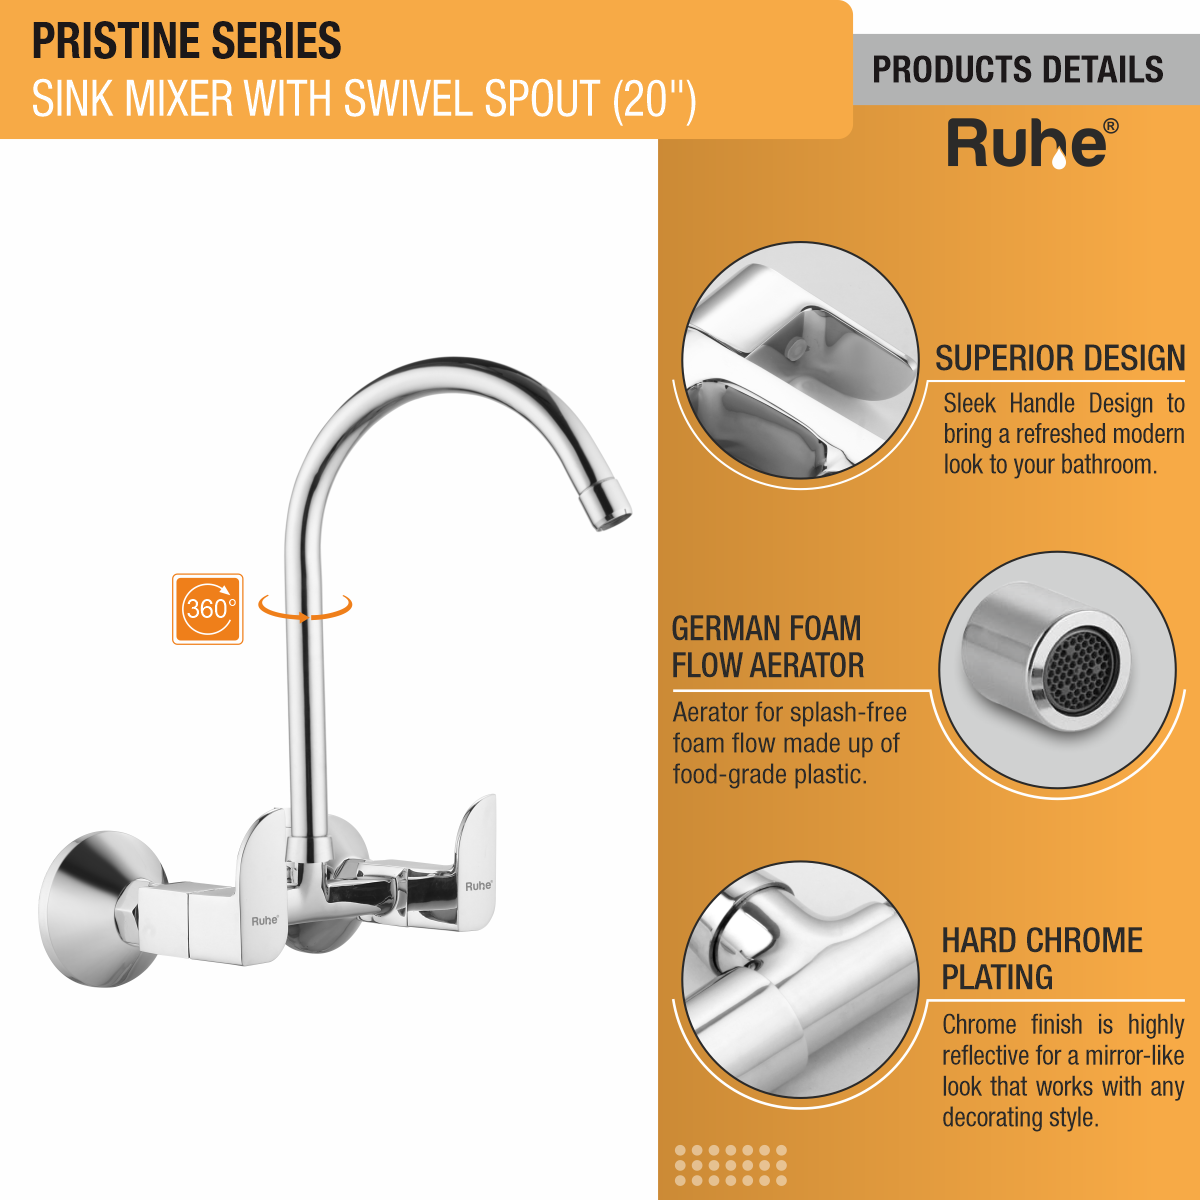 Pristine Sink Mixer with Large (20 inches) Round Swivel Spout Brass Faucet product details